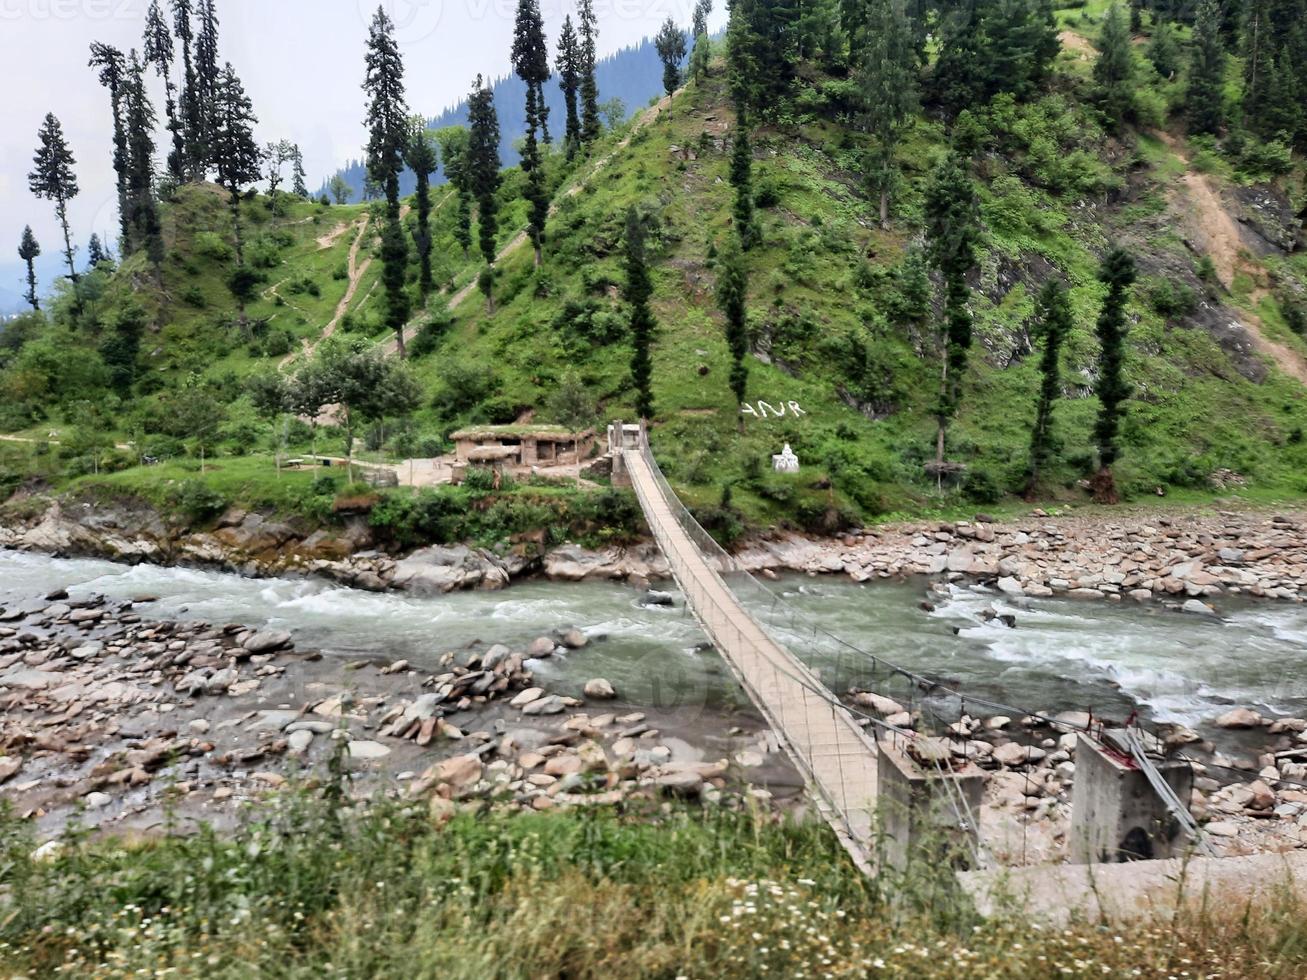 Kashmir is the most beautiful region in the world which is famous for its green valleys, beautiful trees, high mountains and flowing springs. photo